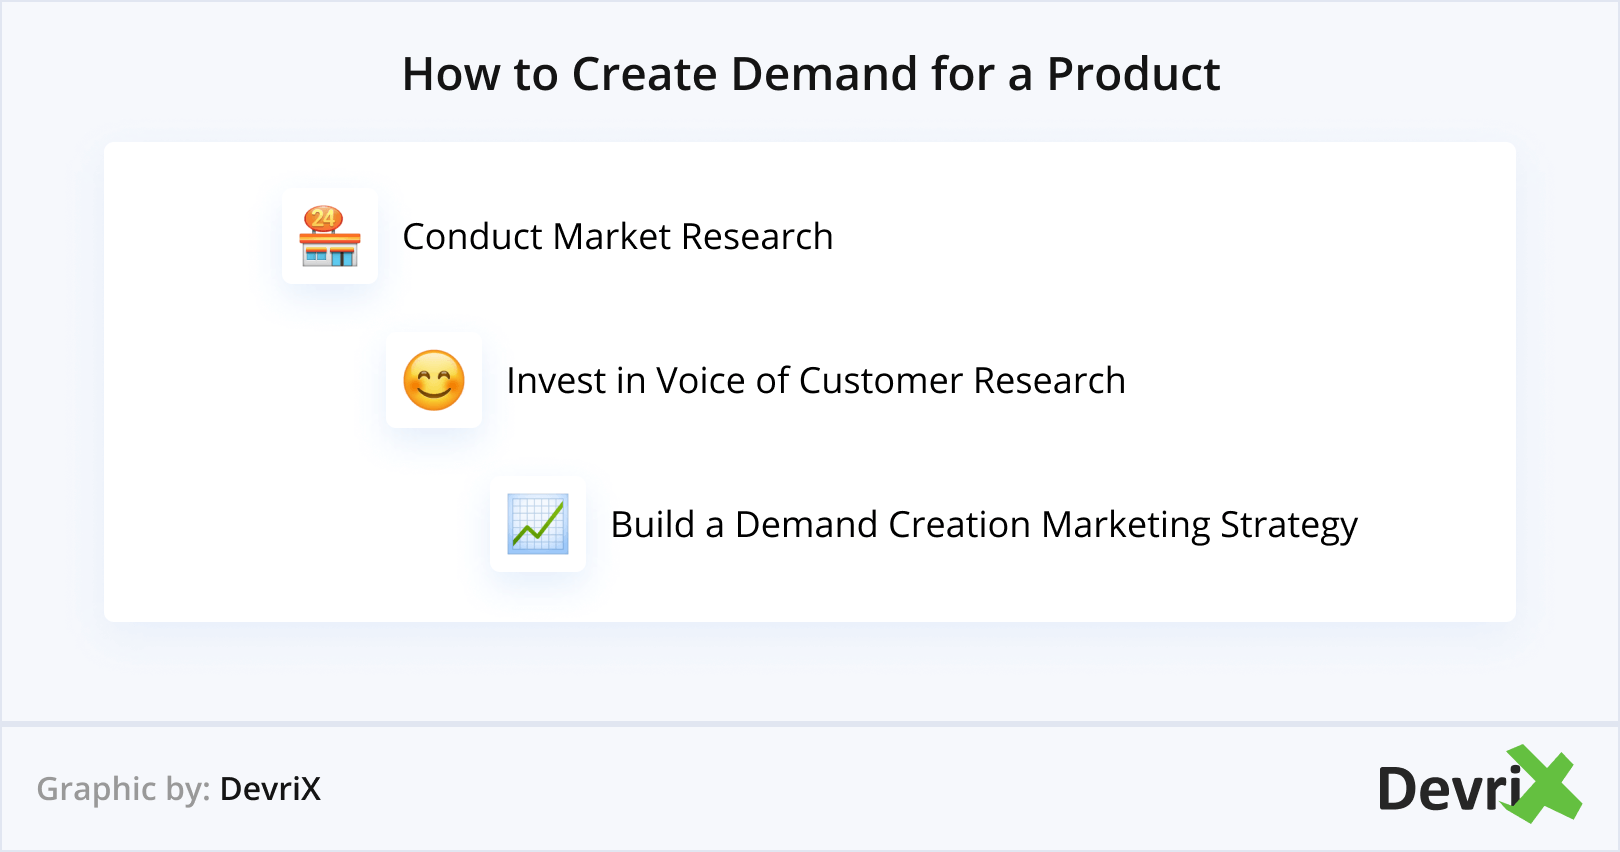 How to Create Demand for a Product